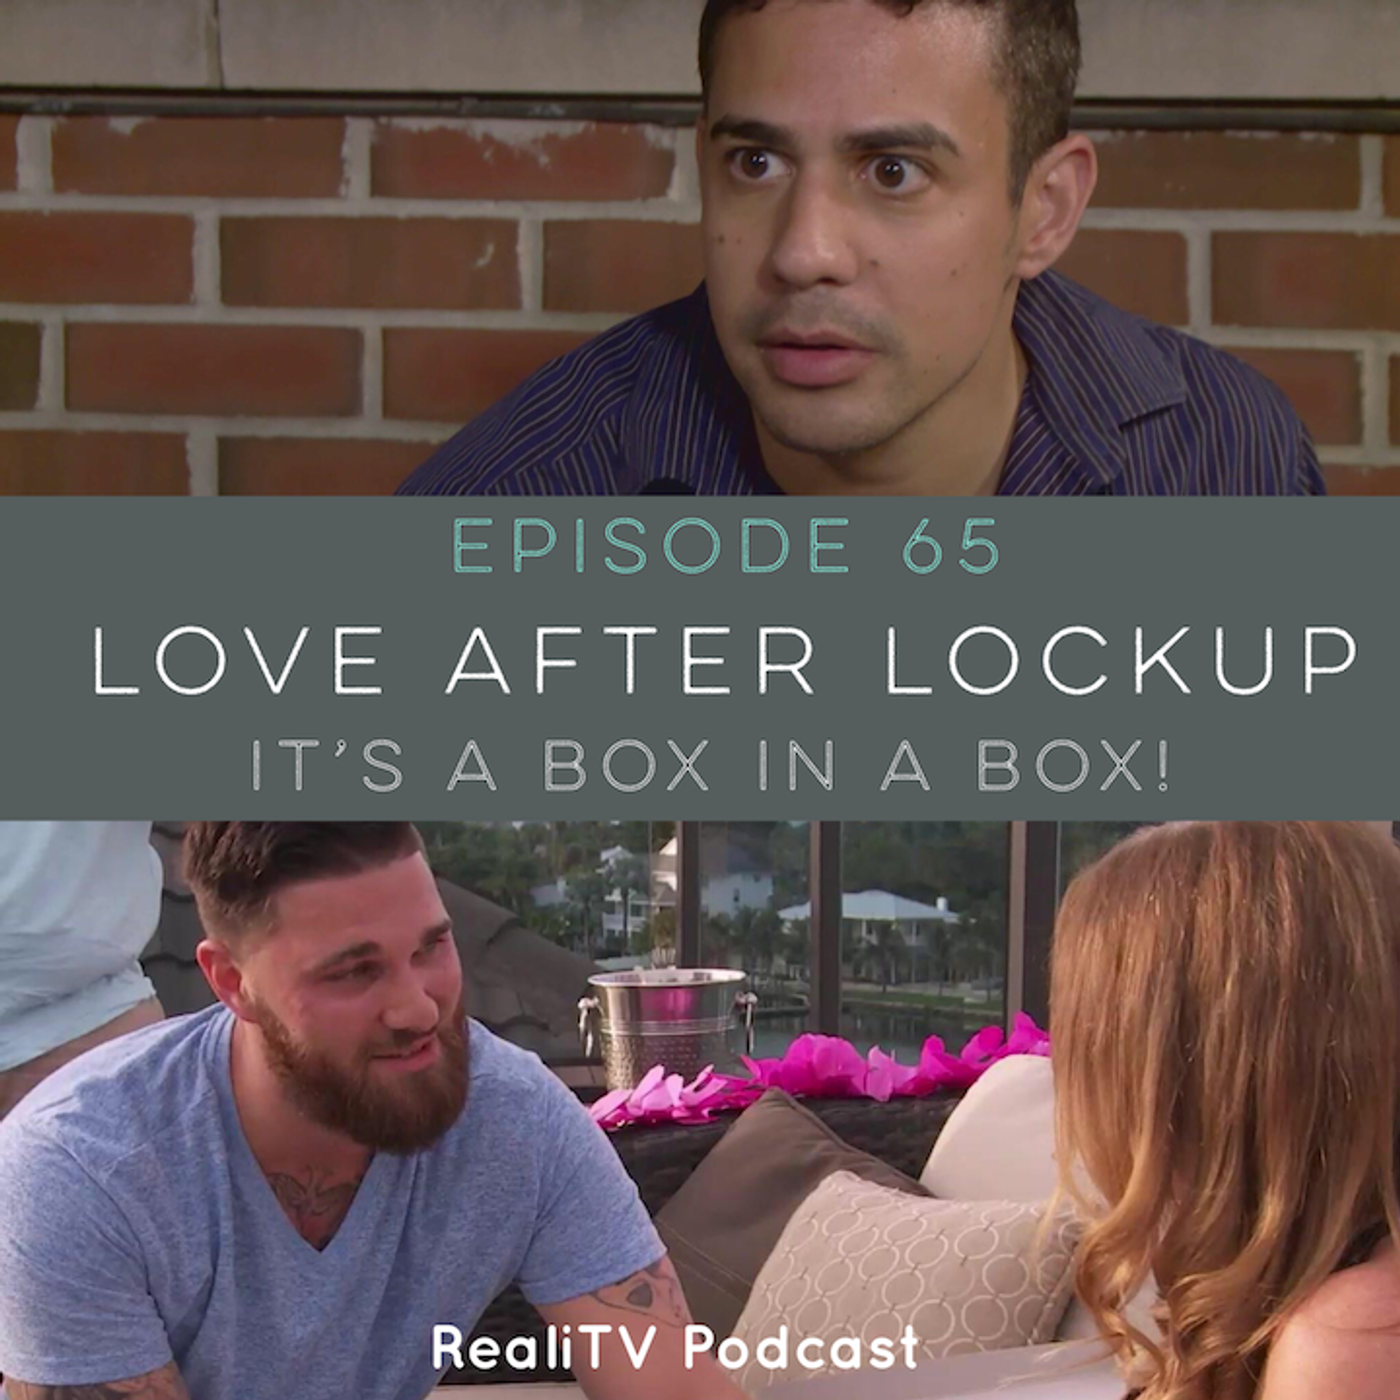 Episode 65: Love After Lockup  It’s a Box in a Box!